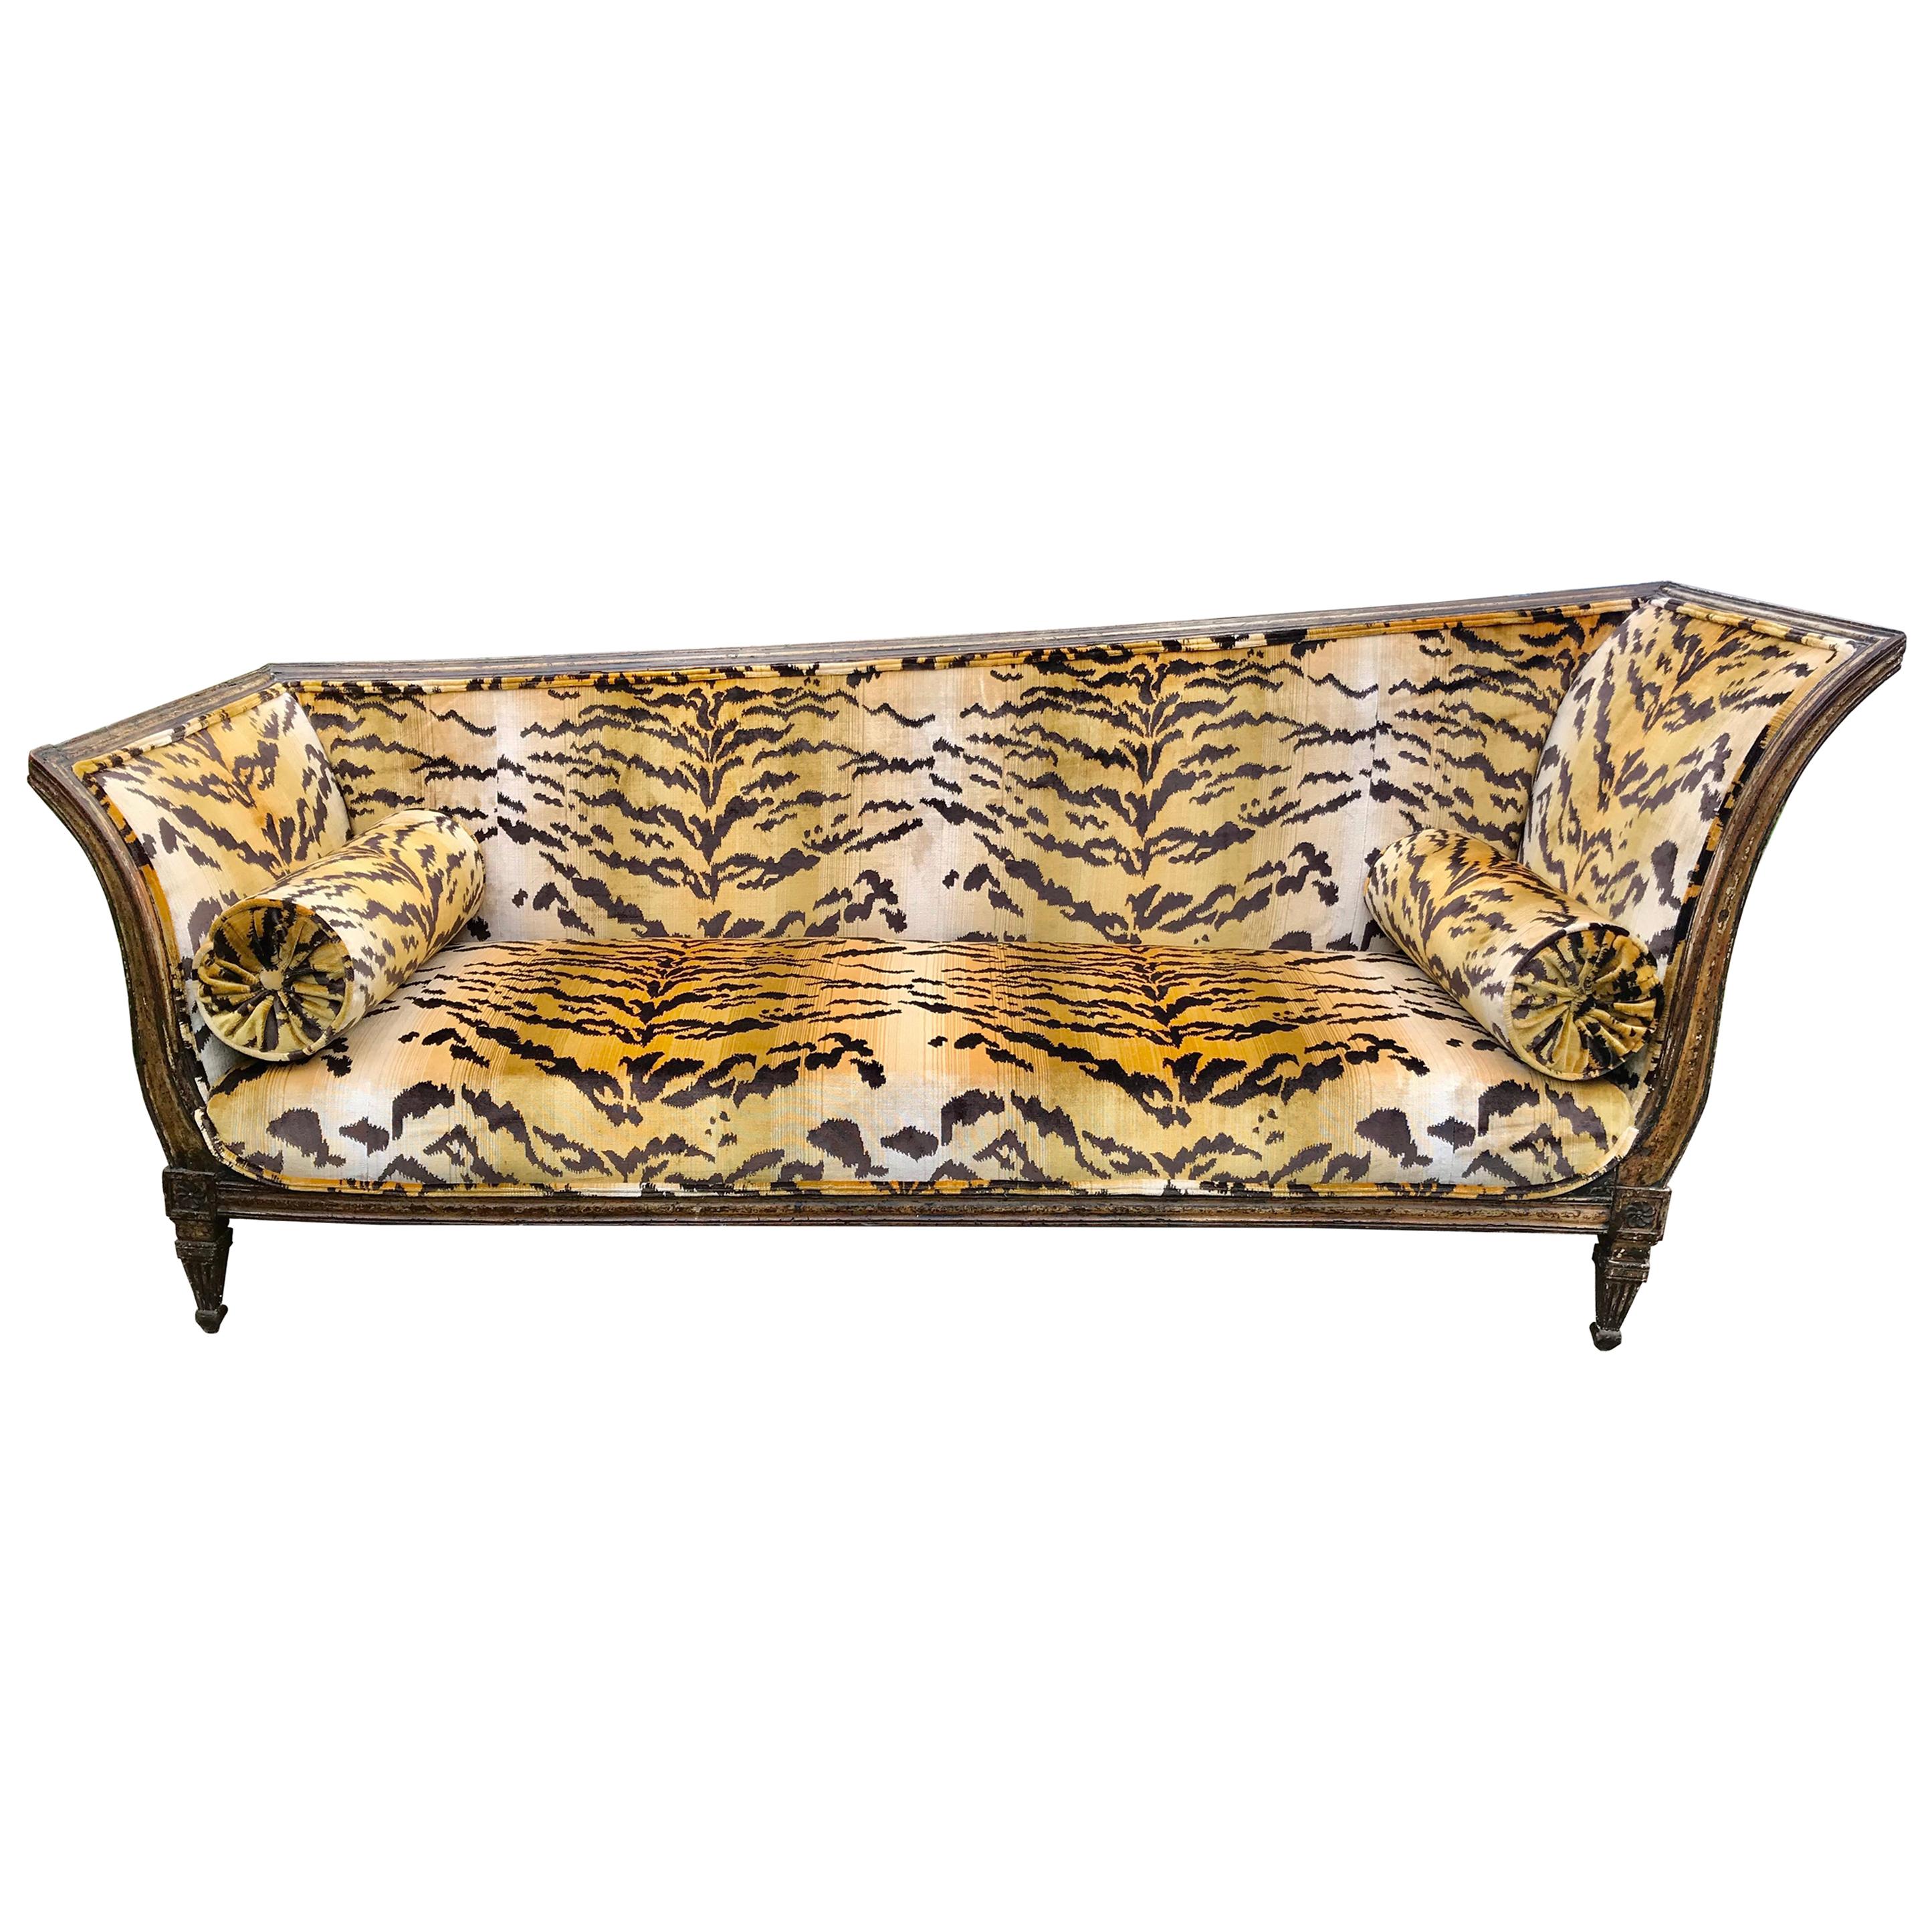 Large Italian Neoclassical Giltwood Récamier Settee in Scalamandré Tiger Velvet